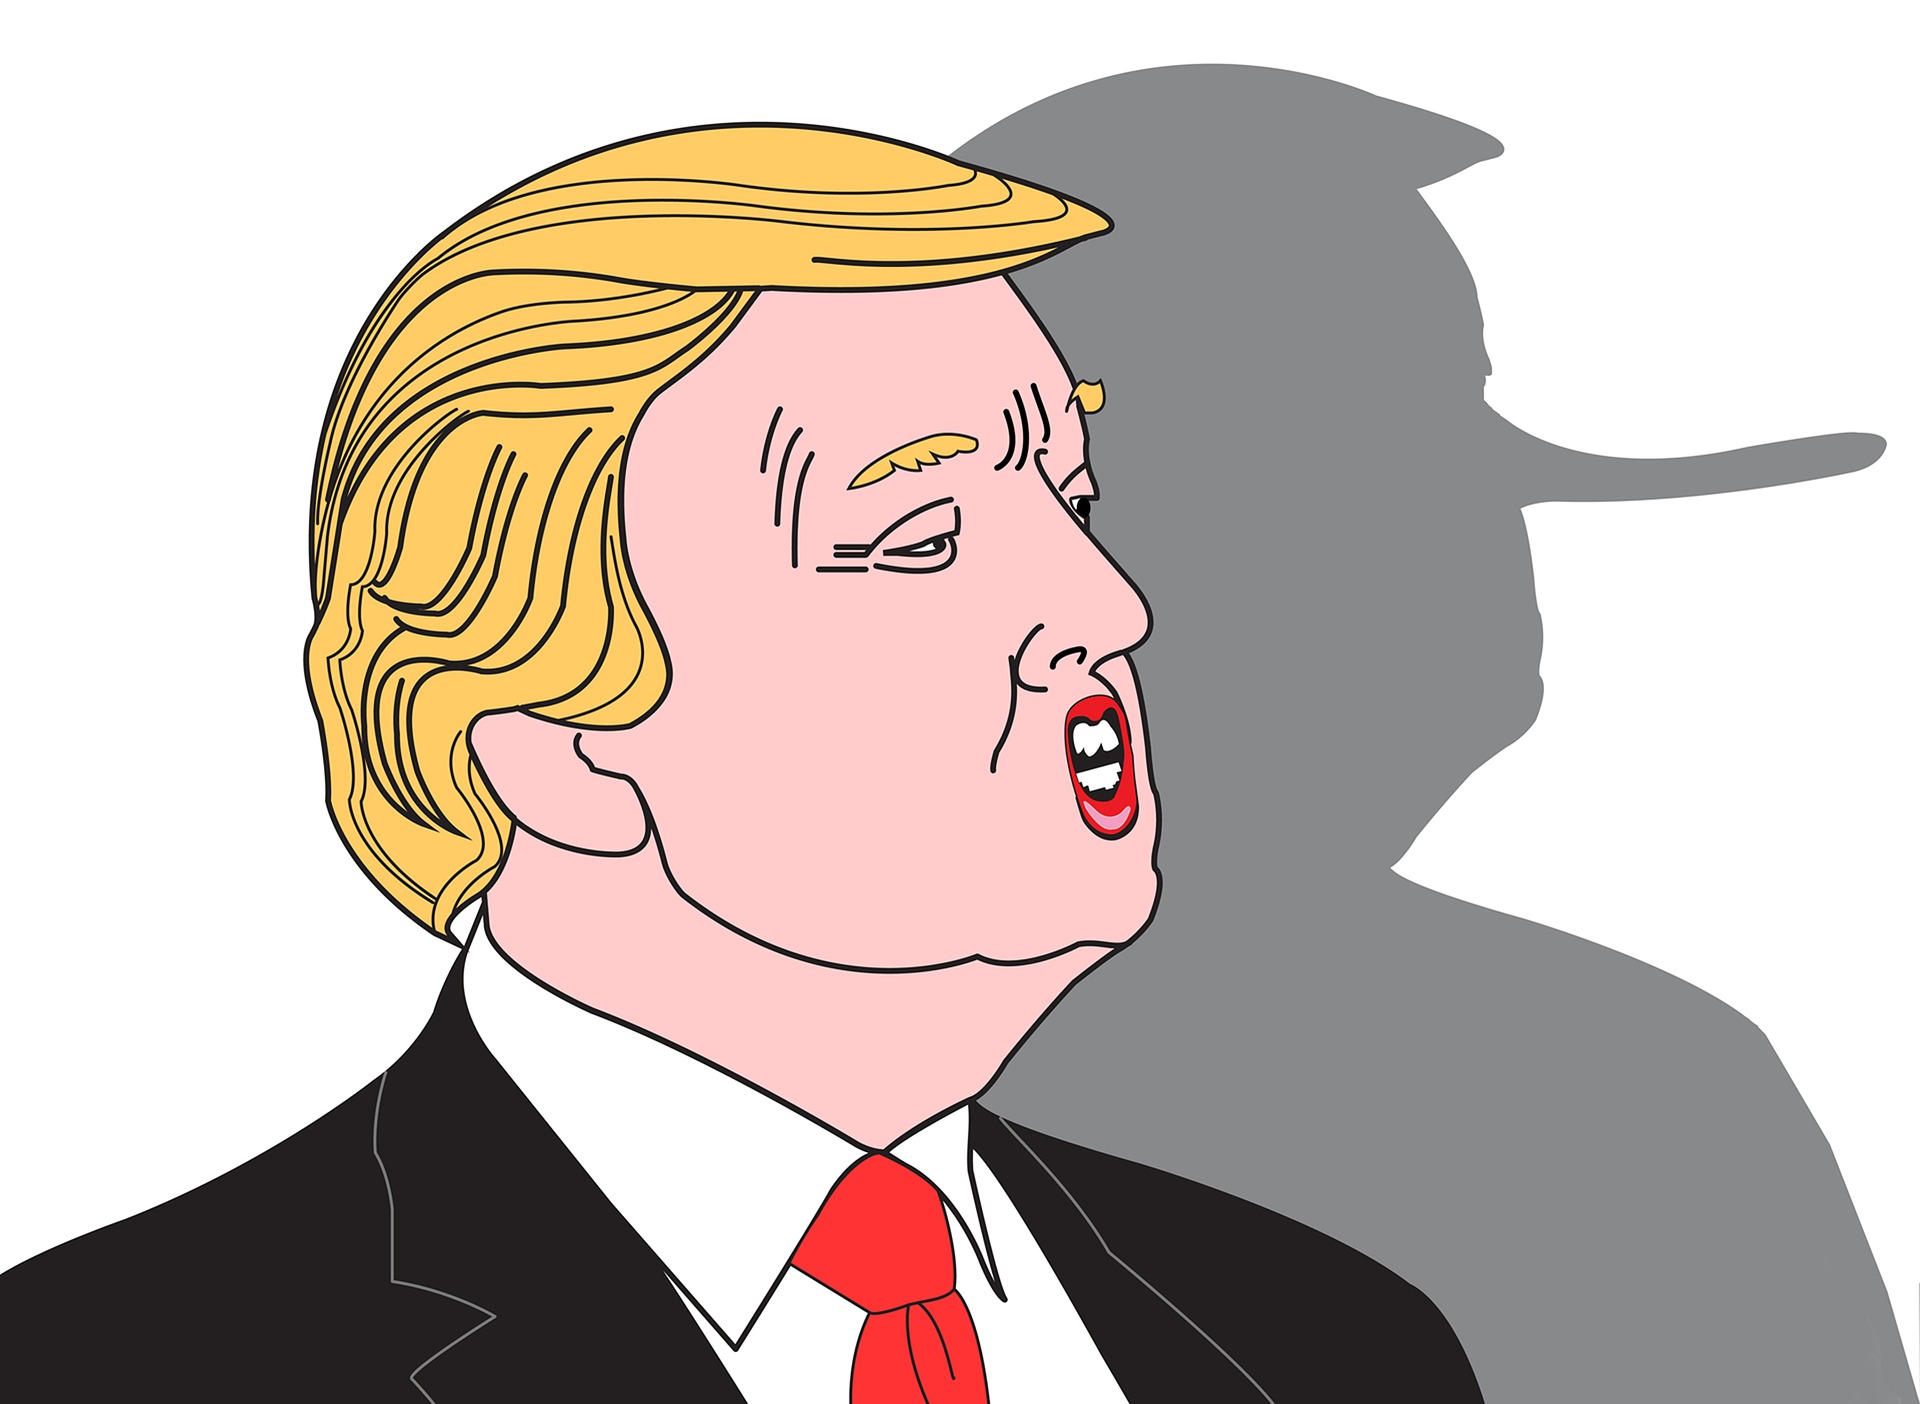 The Surprising Rise of NFT Featuring Donald Trump: A Case Study